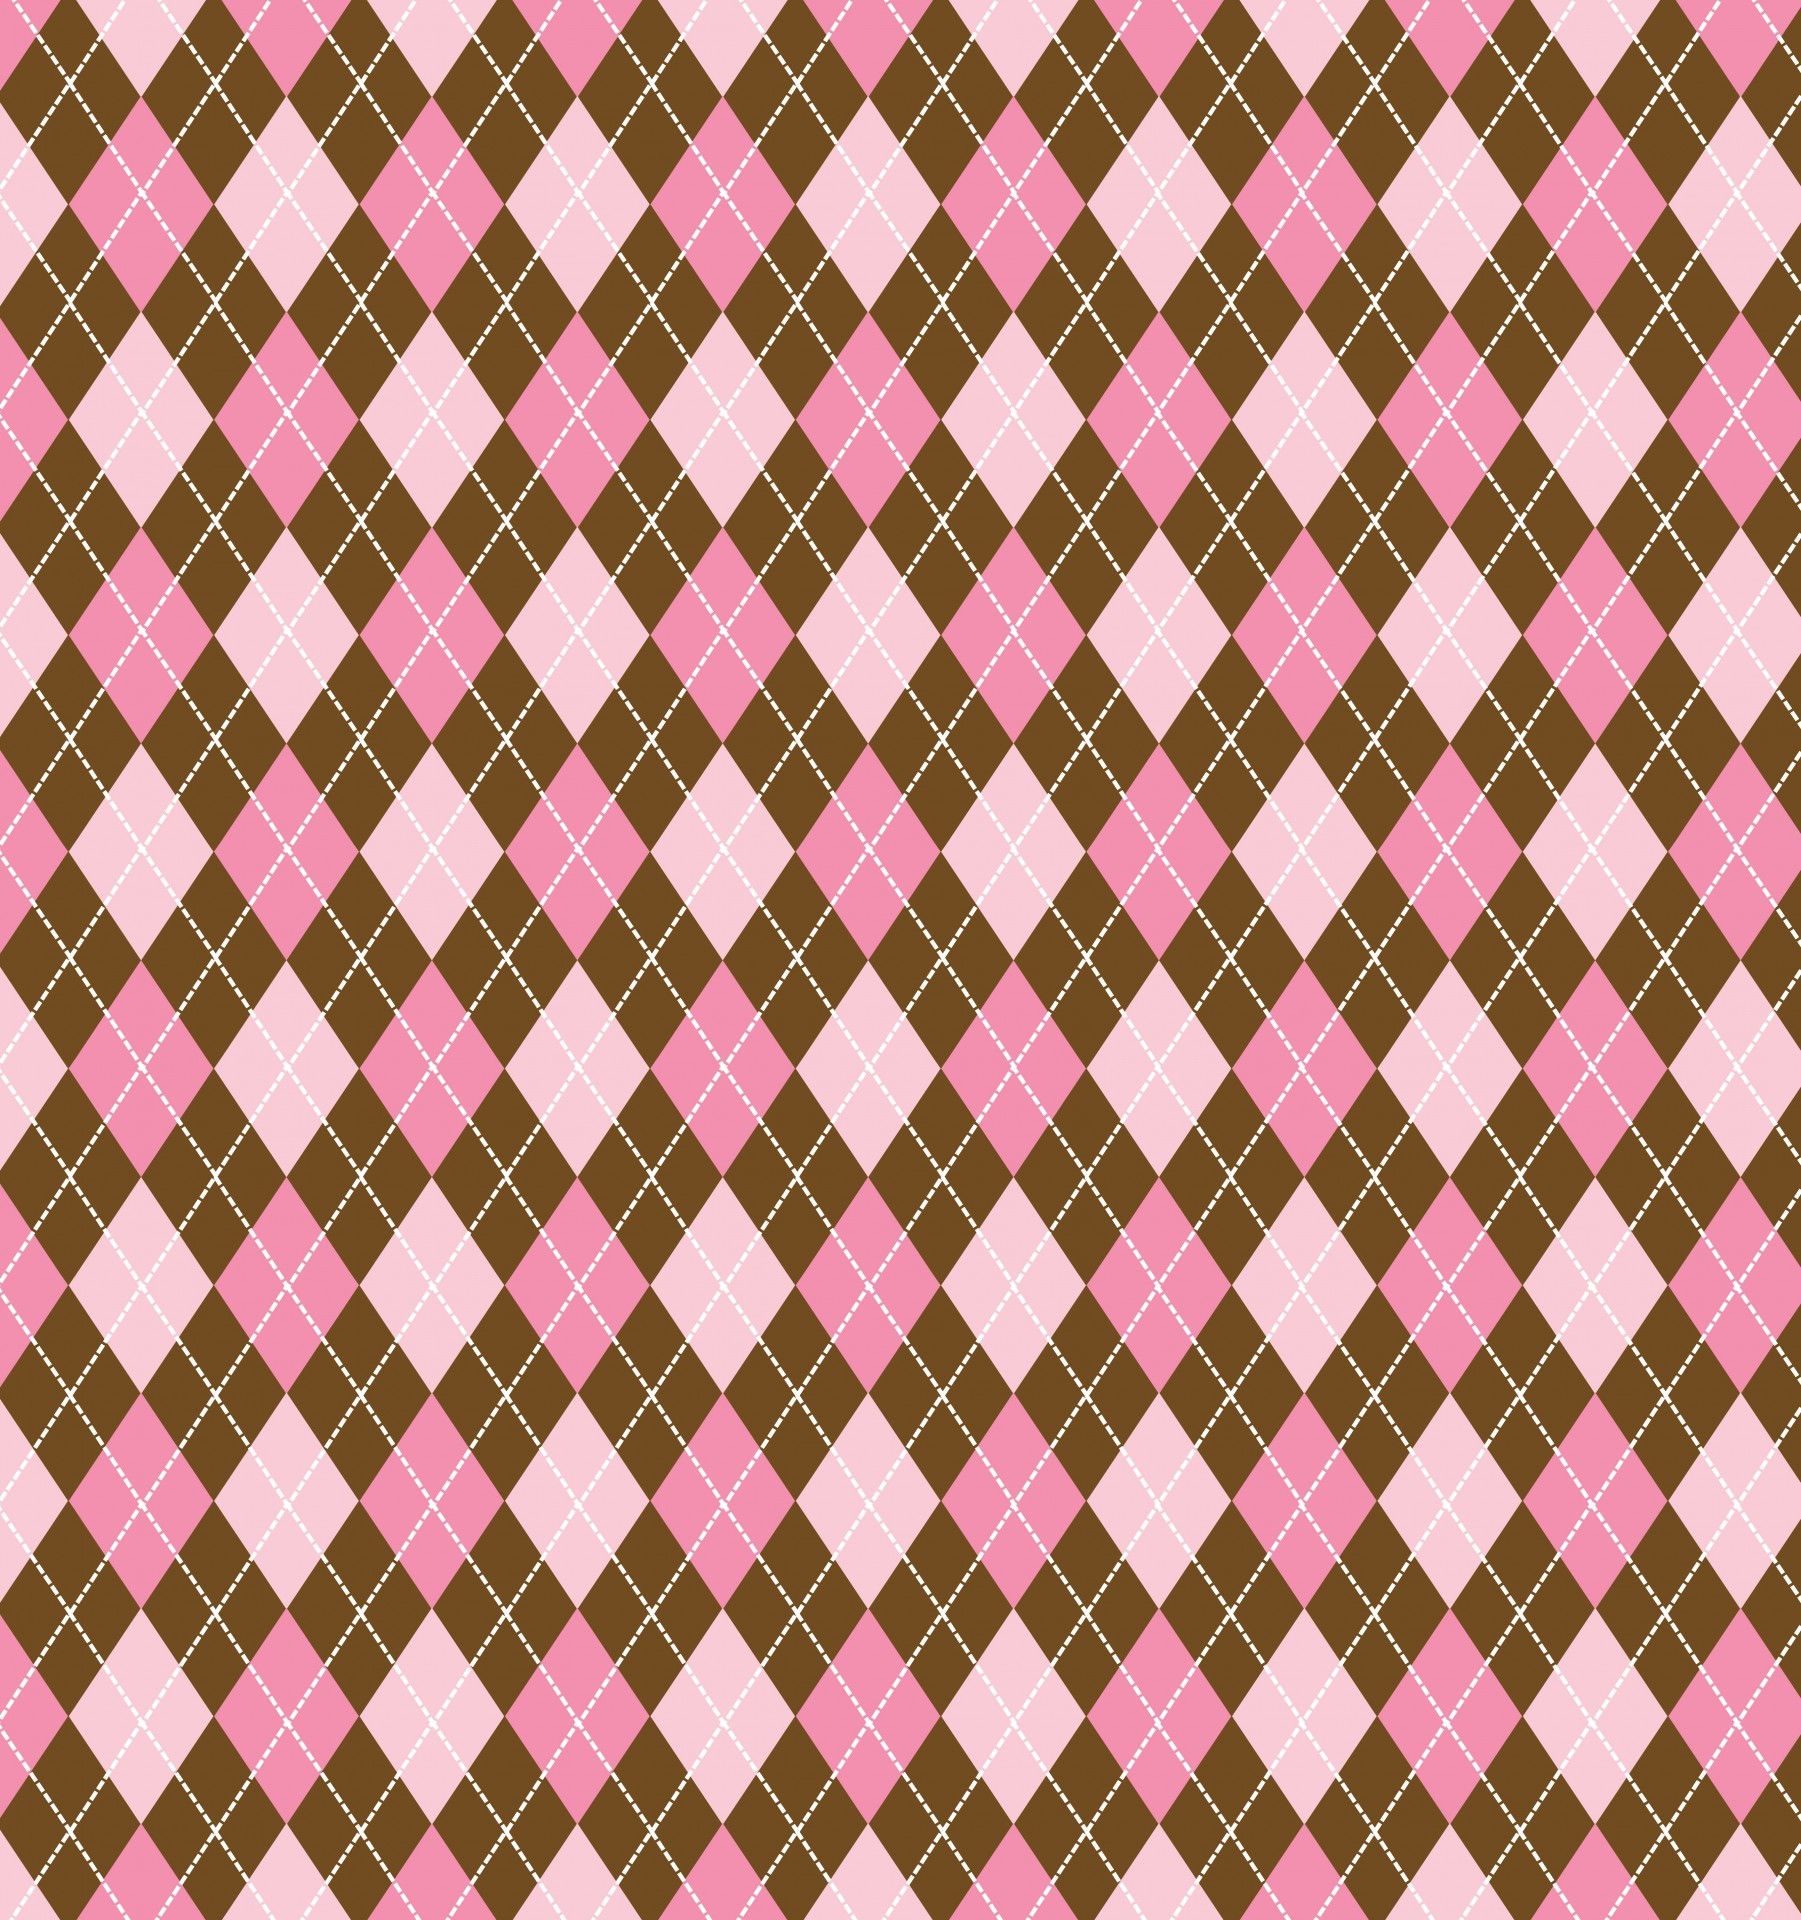 Pink And Brown Wallpaper Image